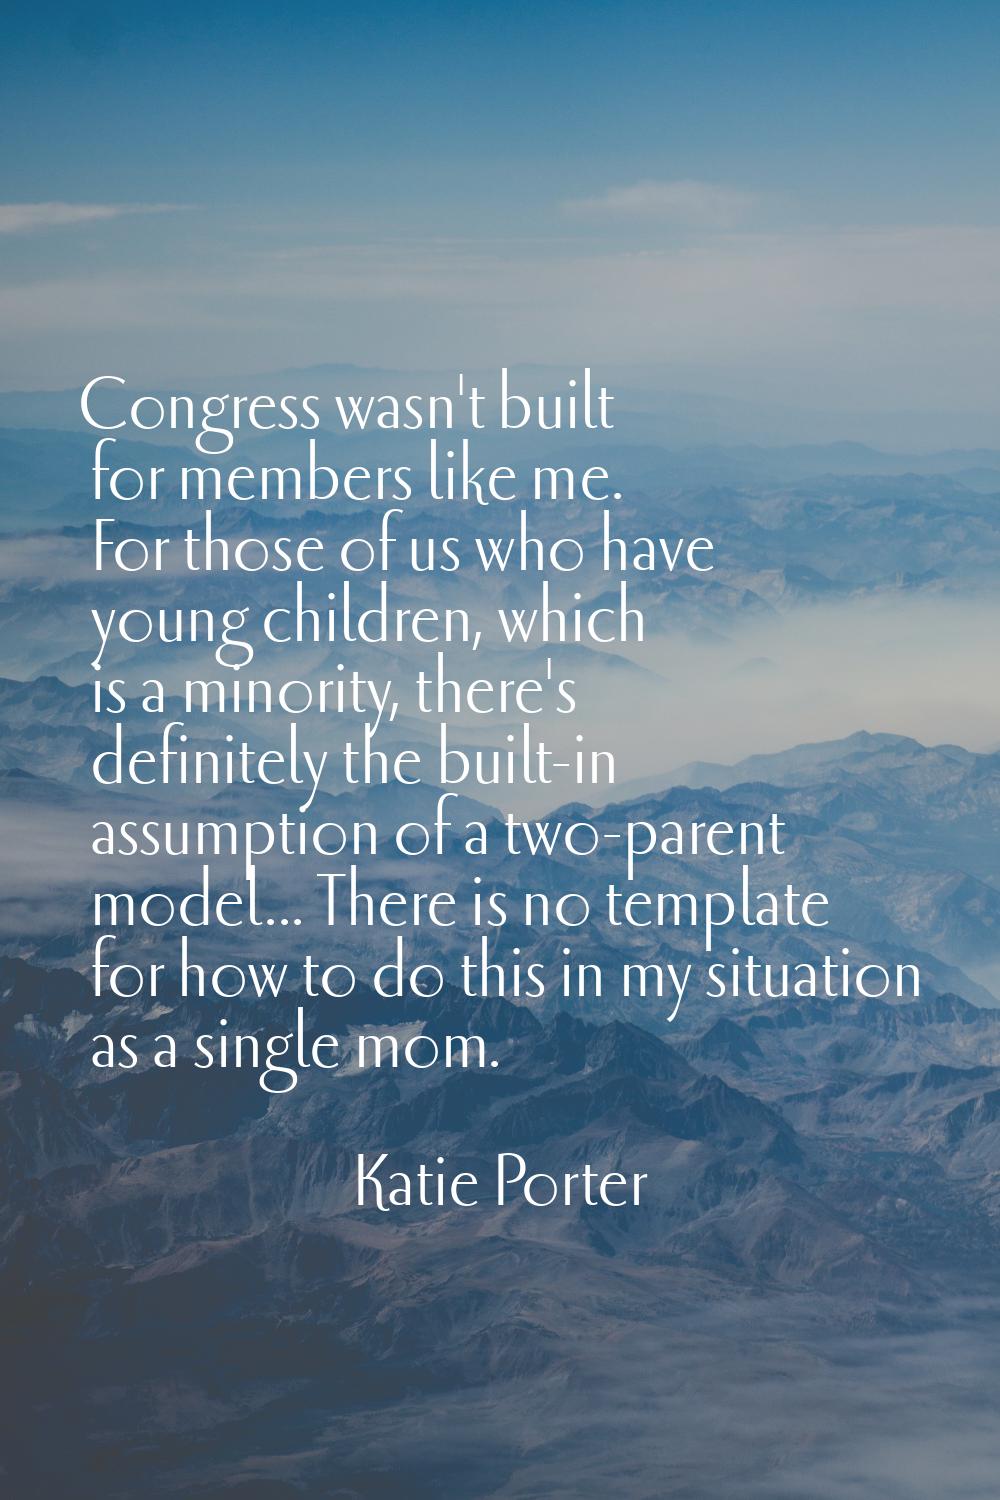 Congress wasn't built for members like me. For those of us who have young children, which is a mino